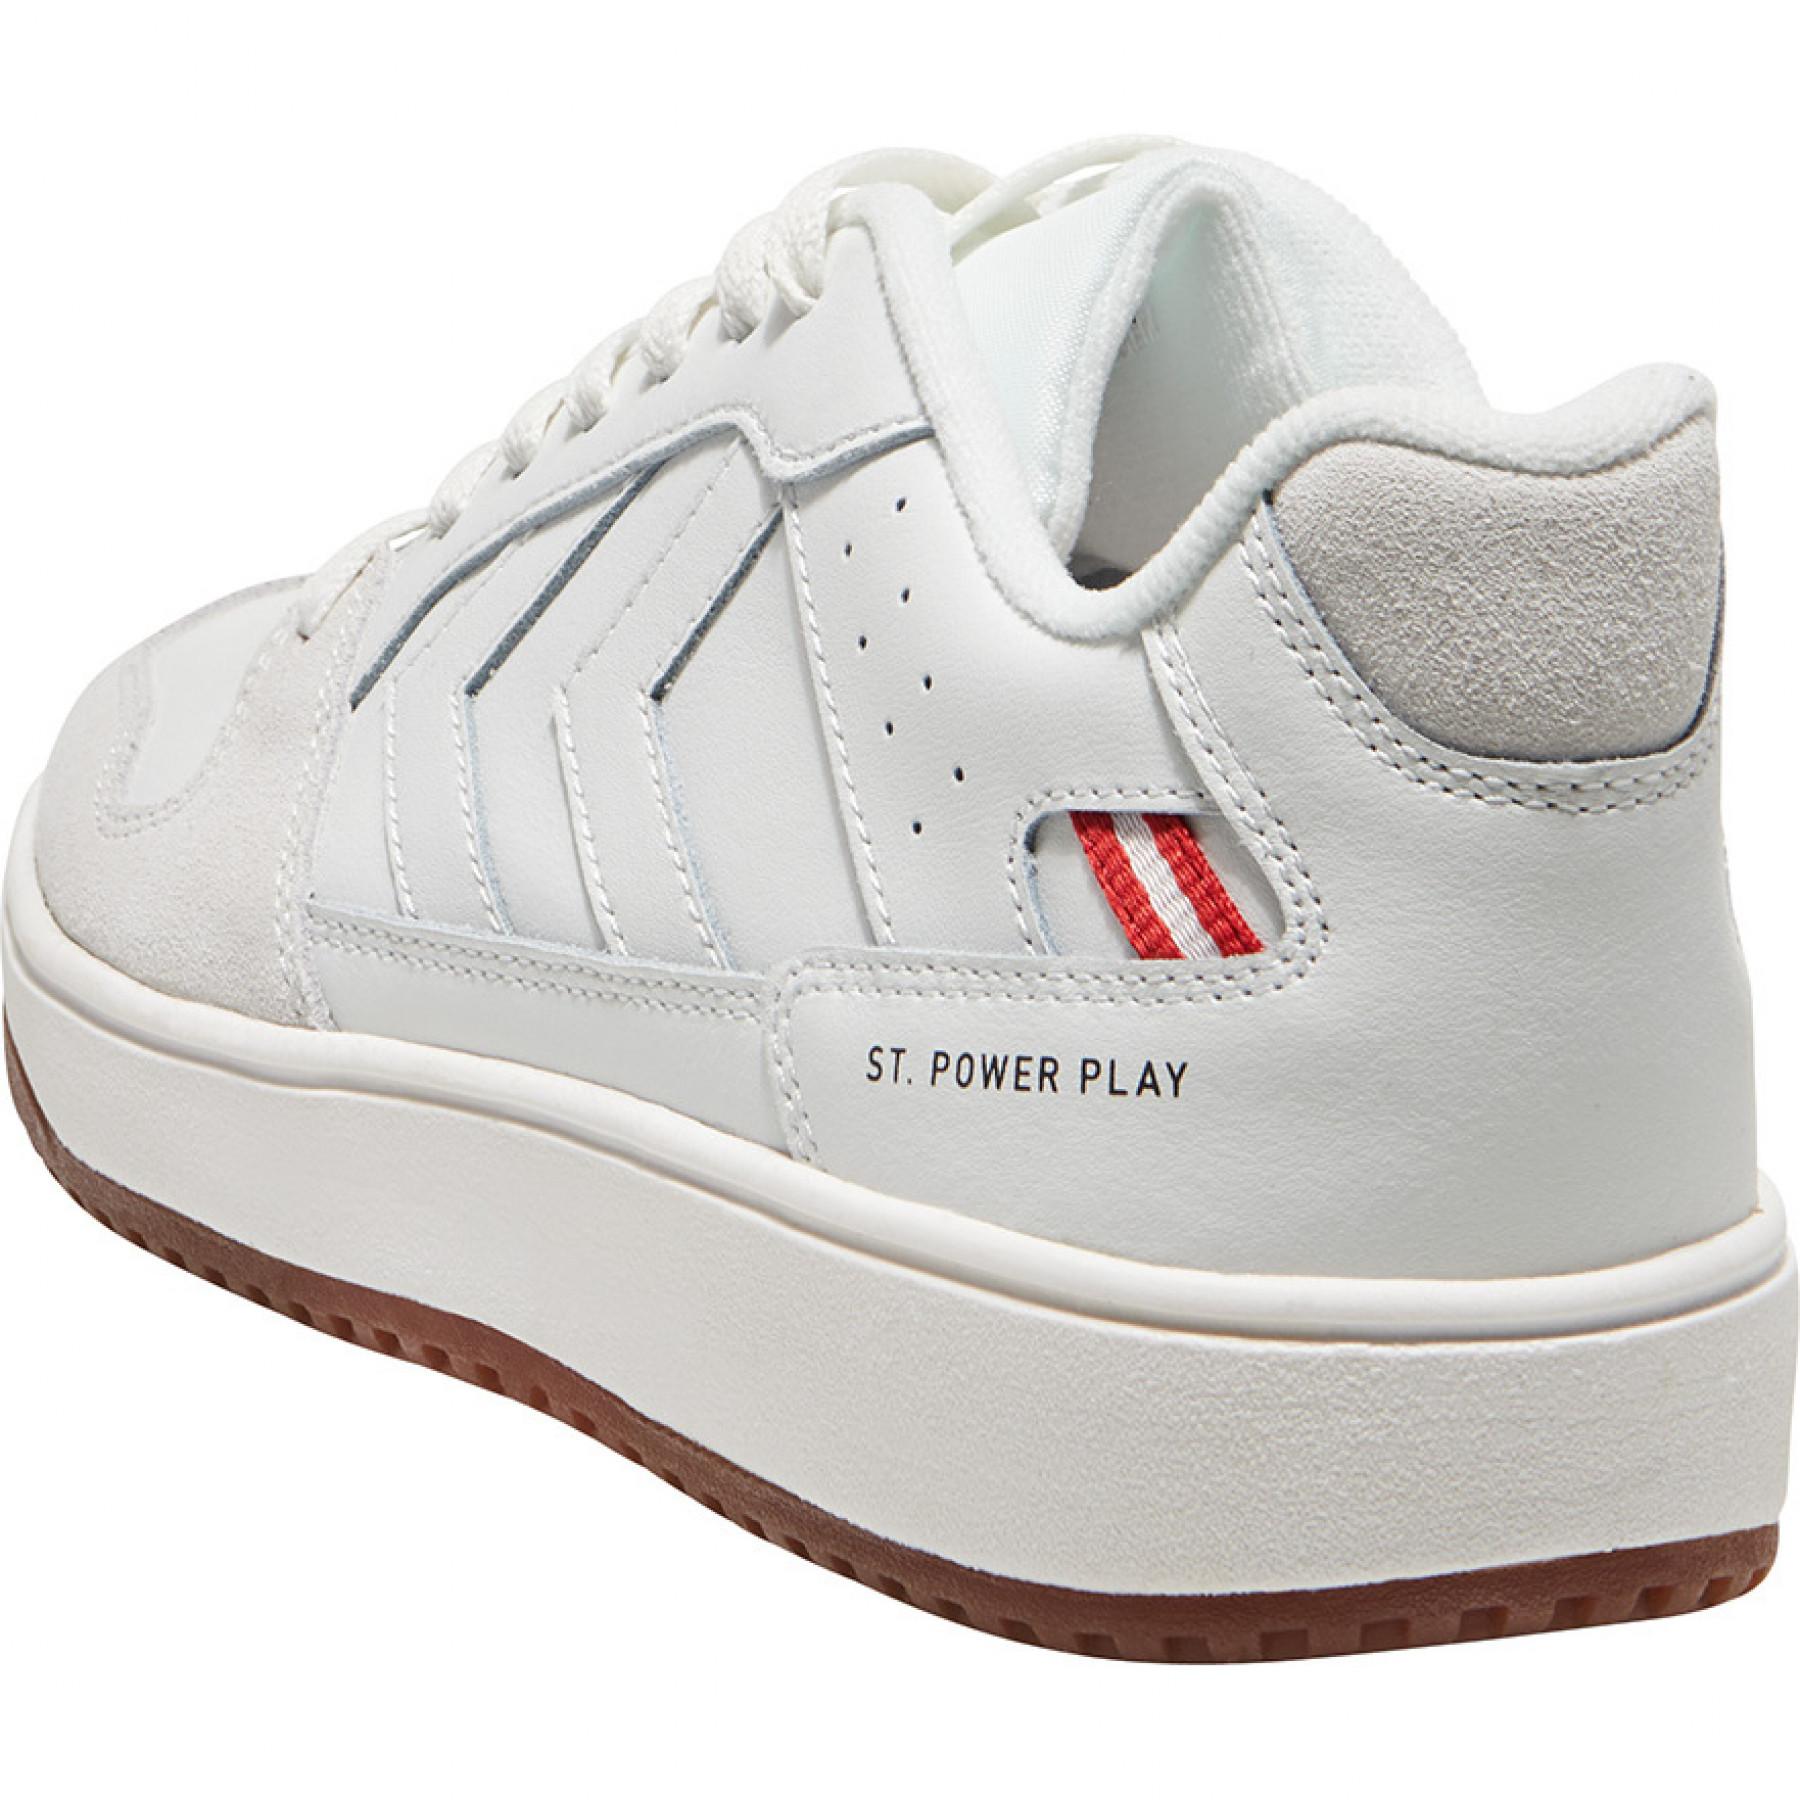 Trainers Hummel st. power play